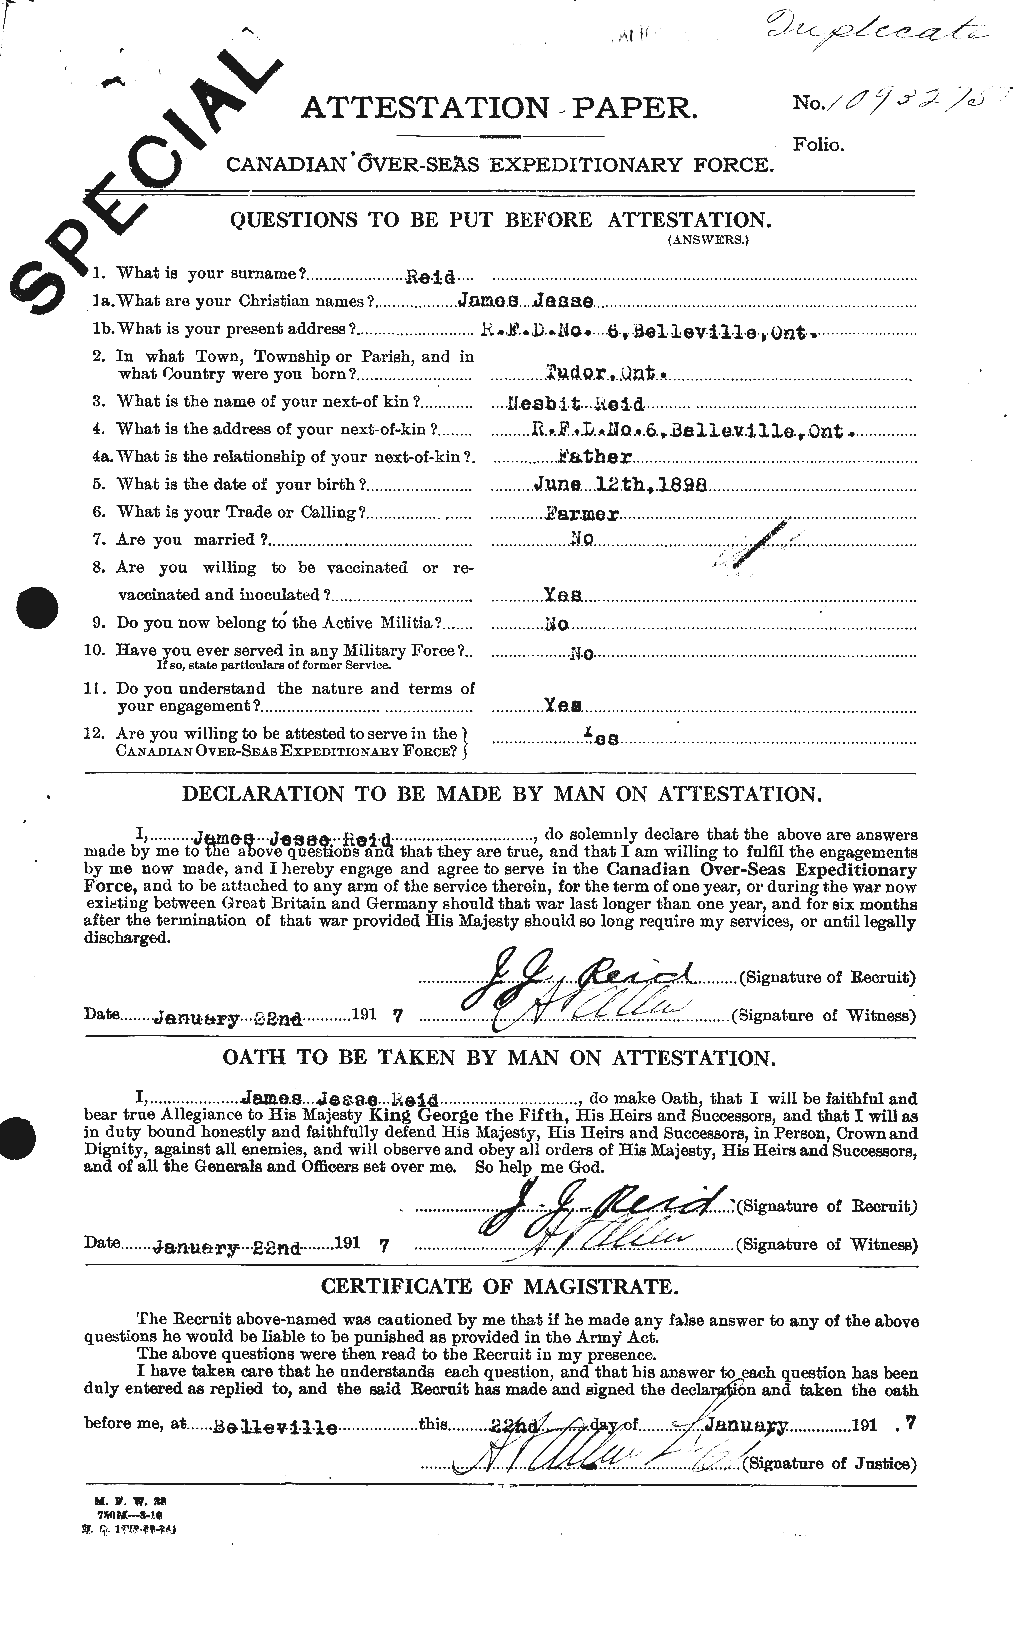 Personnel Records of the First World War - CEF 598721a